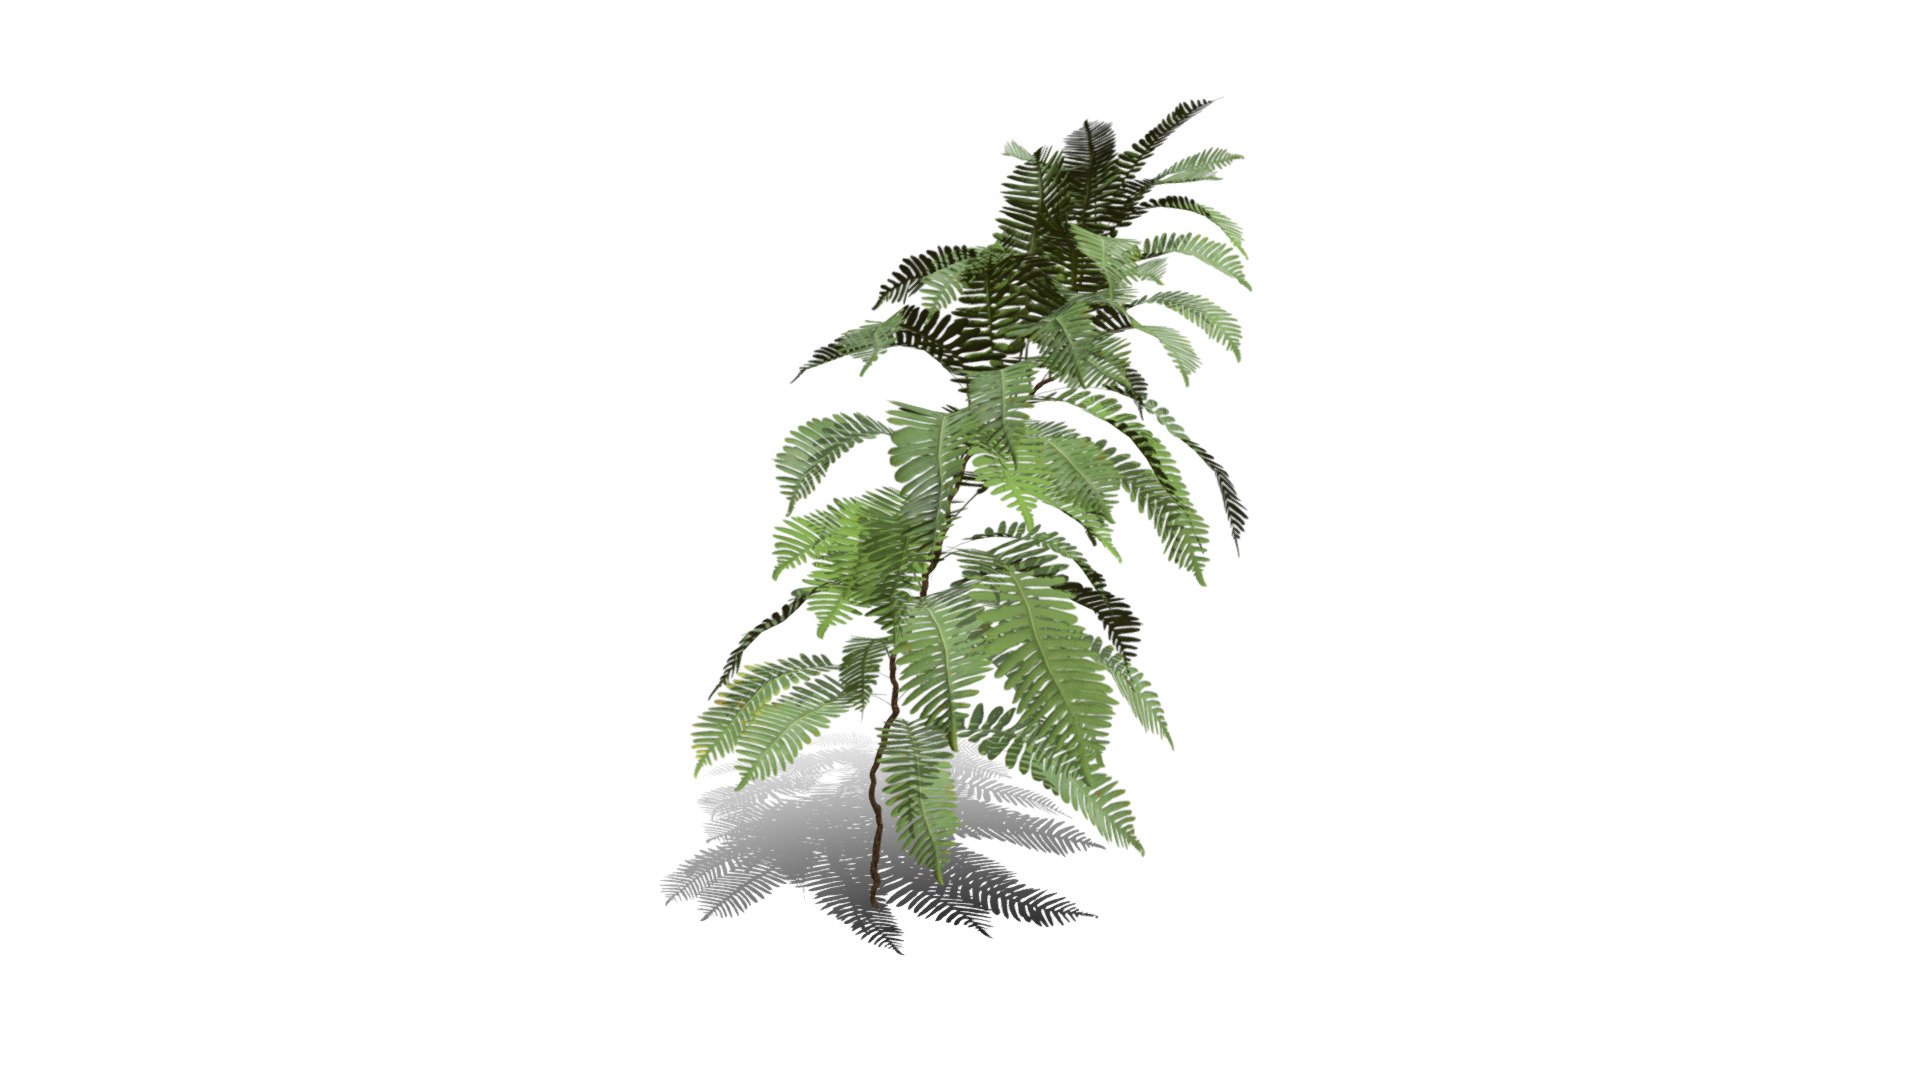 Model specs:





Species Latin name: Polypodium vulgare




Species Common name: Common polypody fern




Preset name: Wall growth 4 mat 75




Maturity stage: Mature




Health stage: Thriving




Season stage: Spring




Leaves count: 52




Height: 0.9 meters




LODs included: Yes




Mesh type: static




Vertex colors: (R) Material blending, (A) Ambient occlusion



Better used for Hi Poly workflows!

Species description:





Region: Europe,North America,Asia, Africa,Middle East




Biomes: Forest,Wetland




Climatic Zones: Cold temperate,Warm temperate,Mediterranean




Plant type: Fern



This PlantCatalog mesh was exported at 40% of its maximum mesh resolution. With the full PlantCatalog, customize hundreds of procedural models + apply wind animations + convert to native shaders and a lot more: https://info.e-onsoftware.com/plantcatalog/ - Realistic HD Common polypody fern (19/55) - Buy Royalty Free 3D model by PlantCatalog 3d model